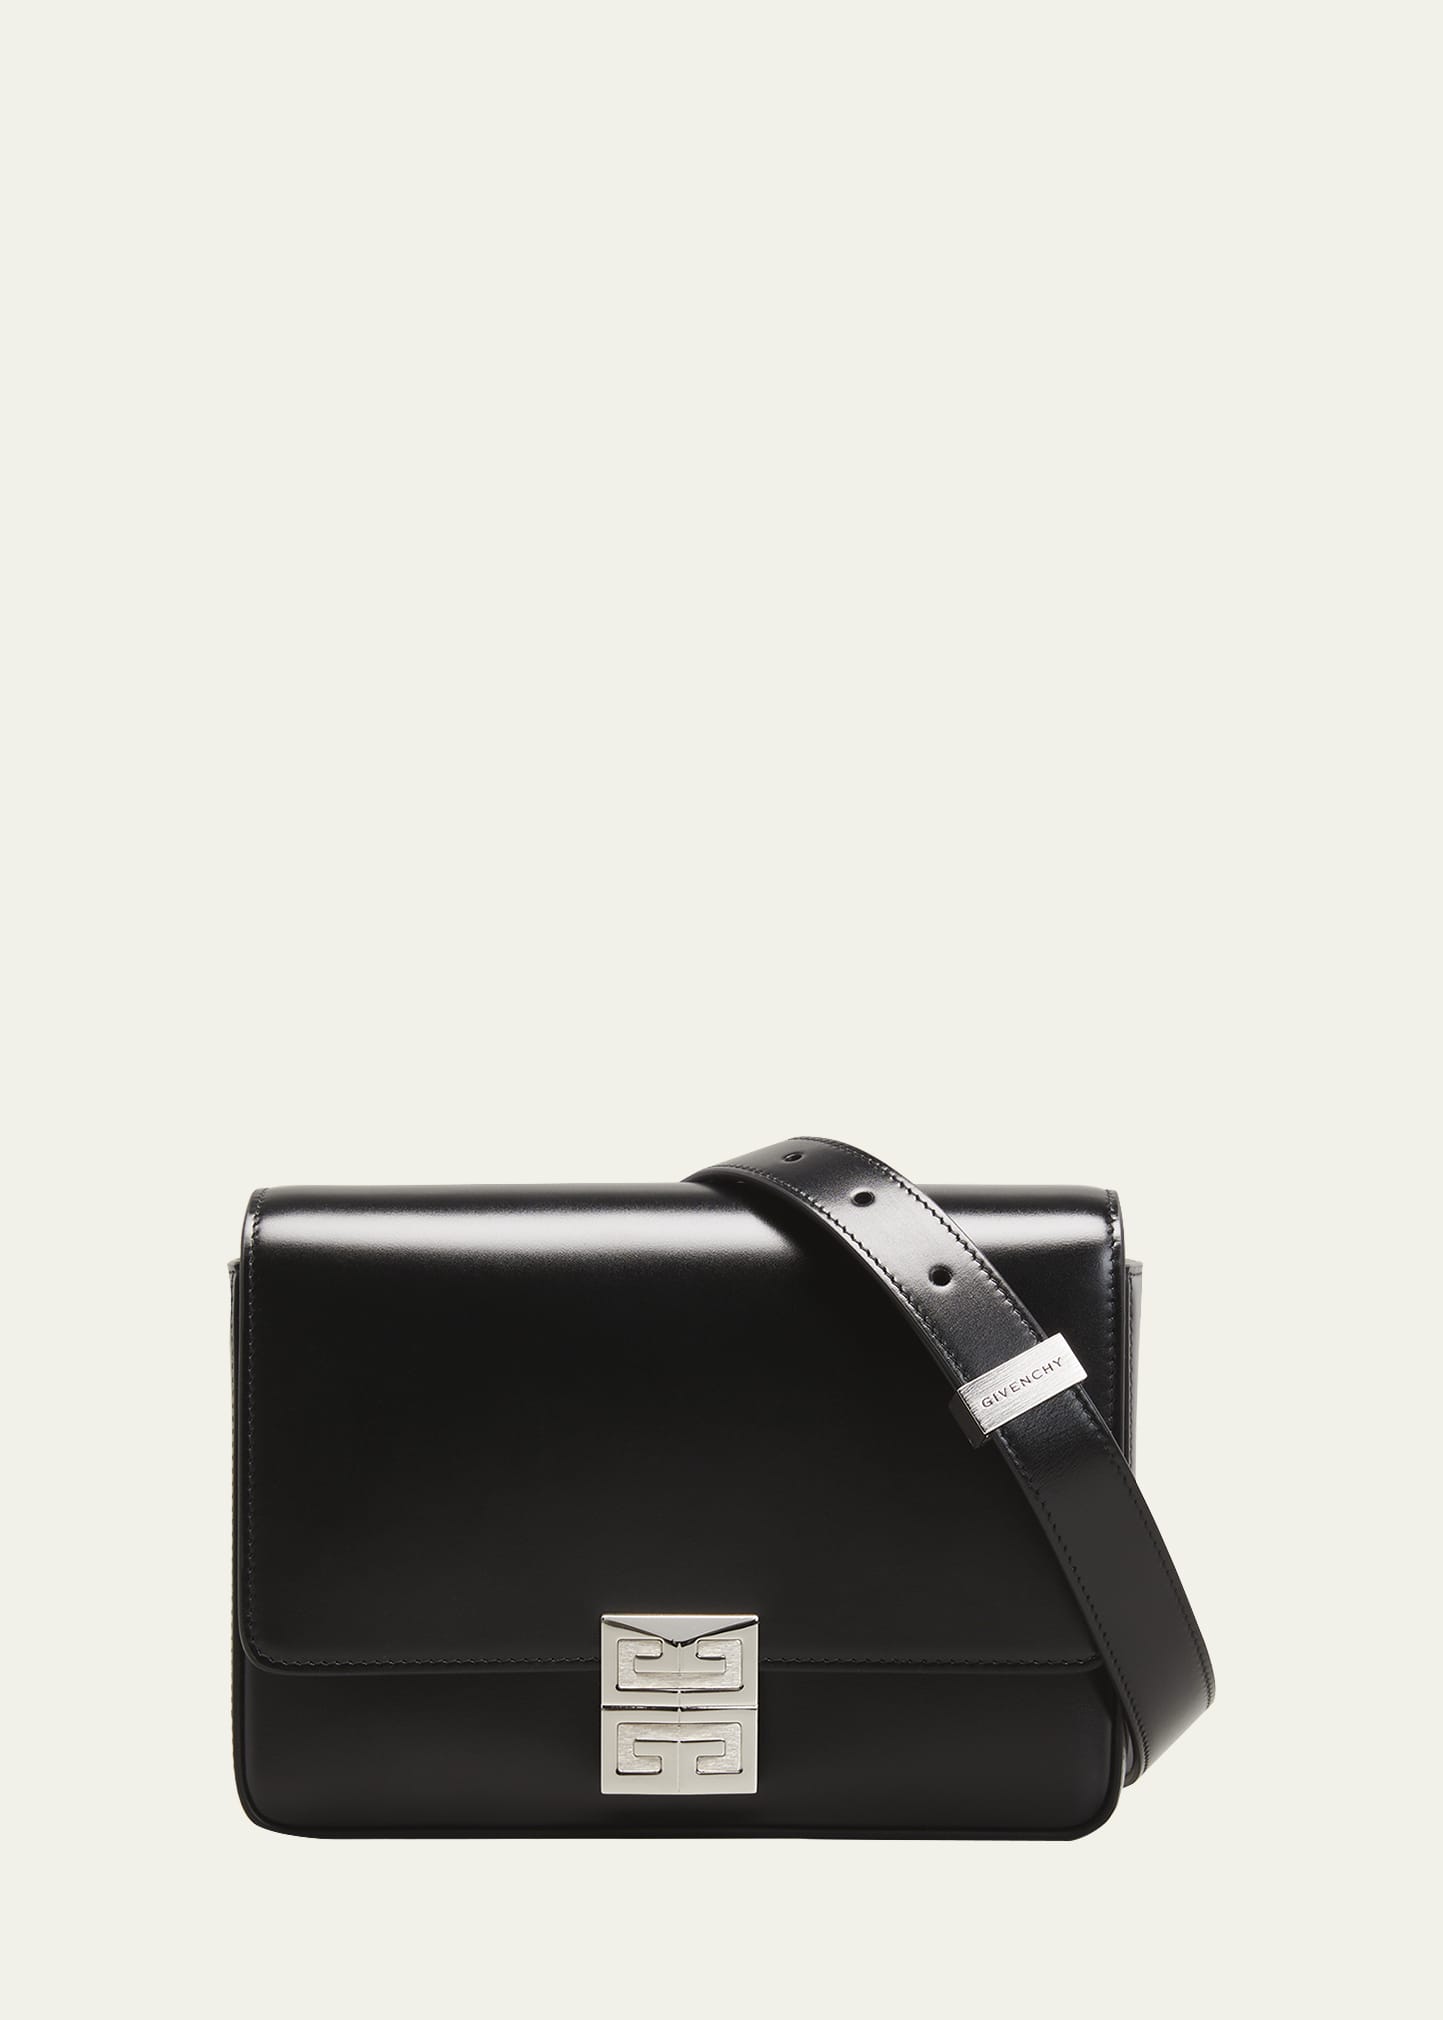 Givenchy Medium 4G Bag in Box Leather